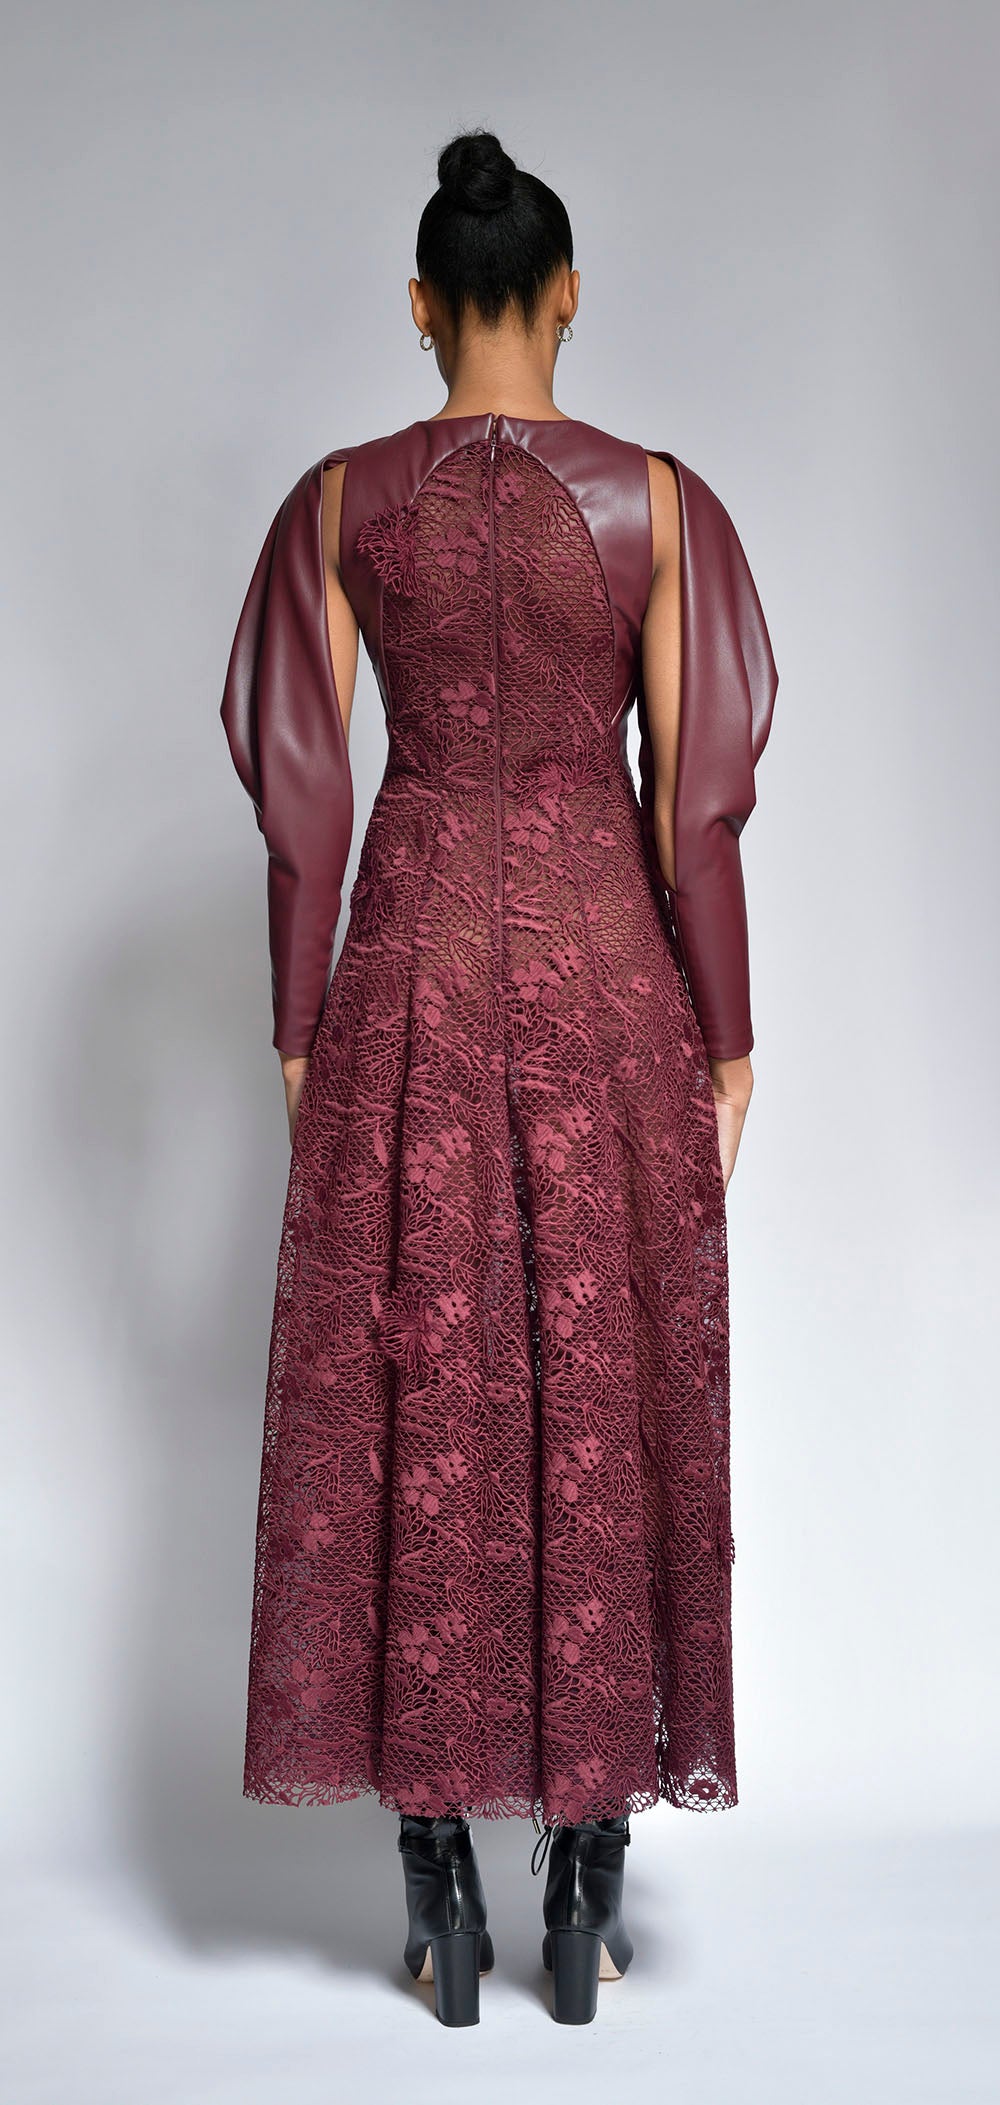 Claret Vegan Leather and Lace Dress with Draped Sleeves